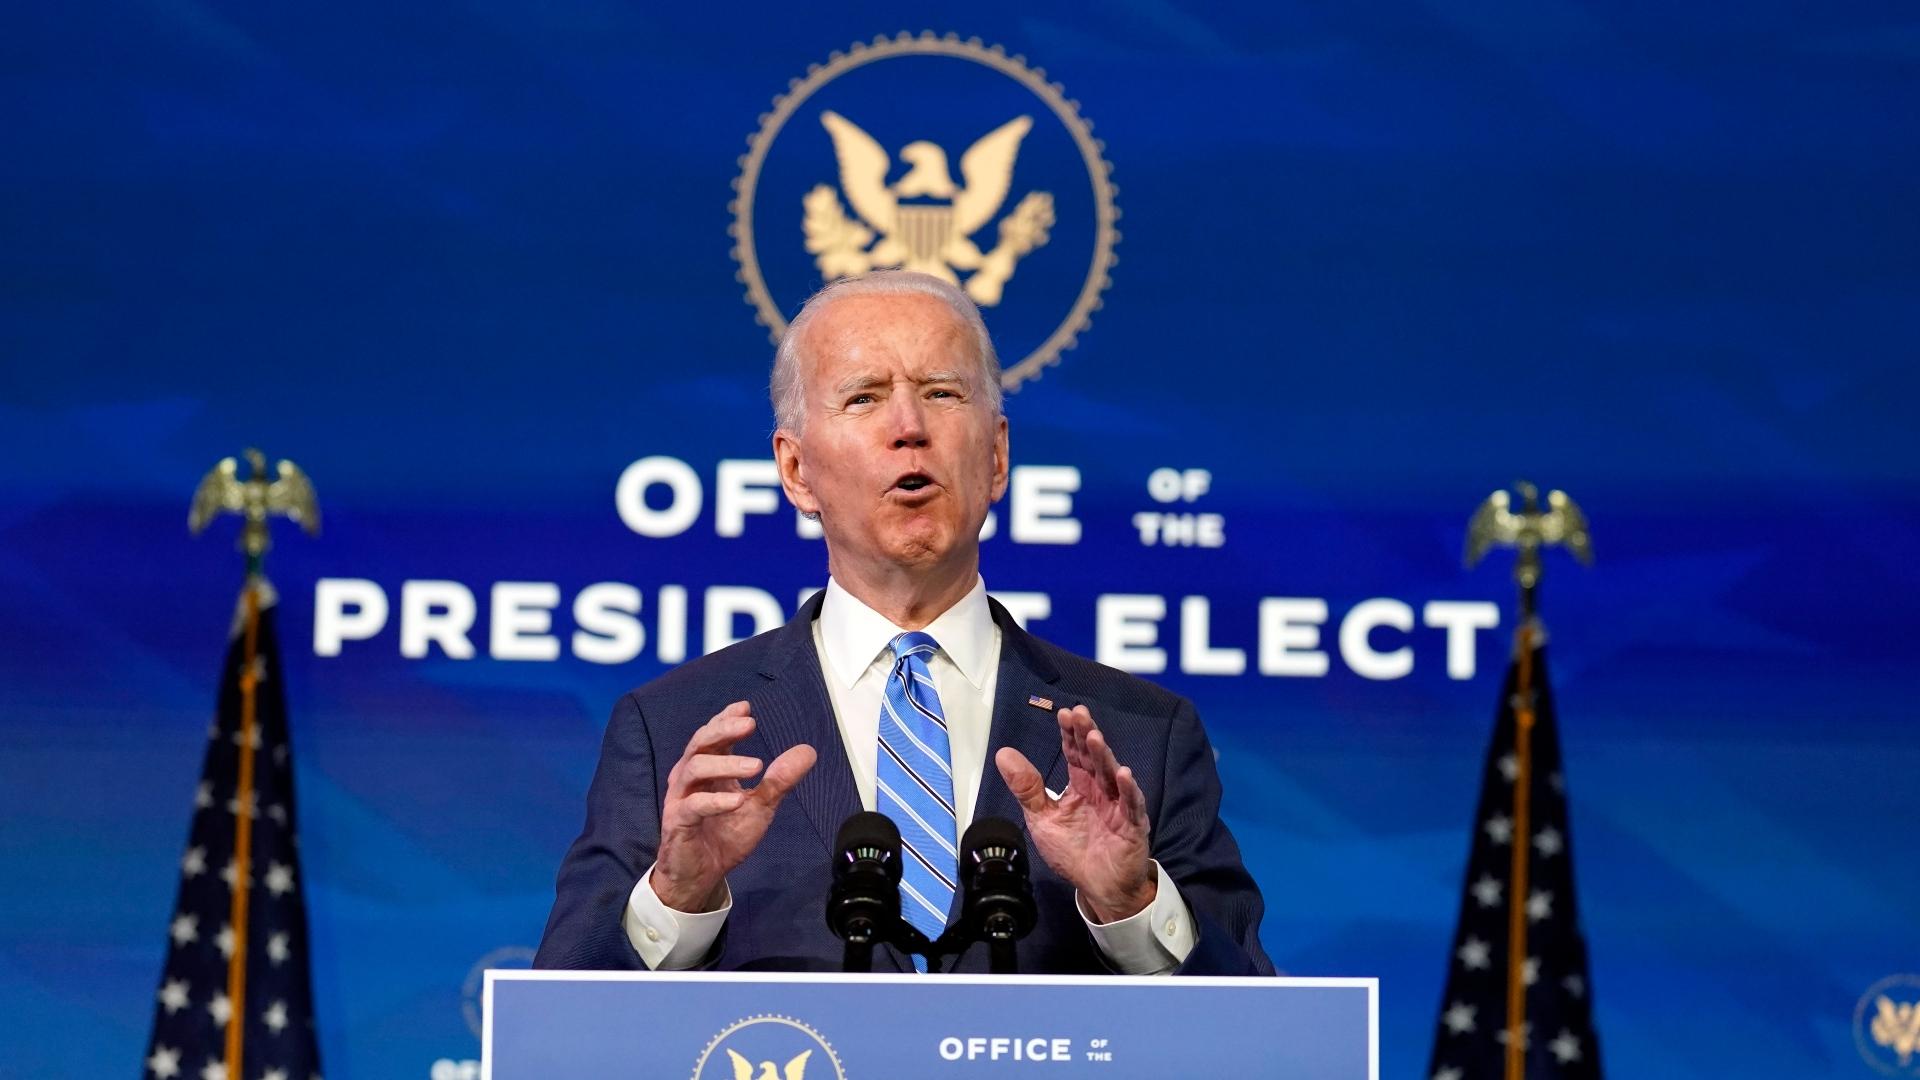 President-elect Joe Biden speaks about the COVID-19 pandemic during an event at The Queen theater, Thursday, Jan. 14, 2021, in Wilmington, Del. (AP Photo / Matt Slocum)